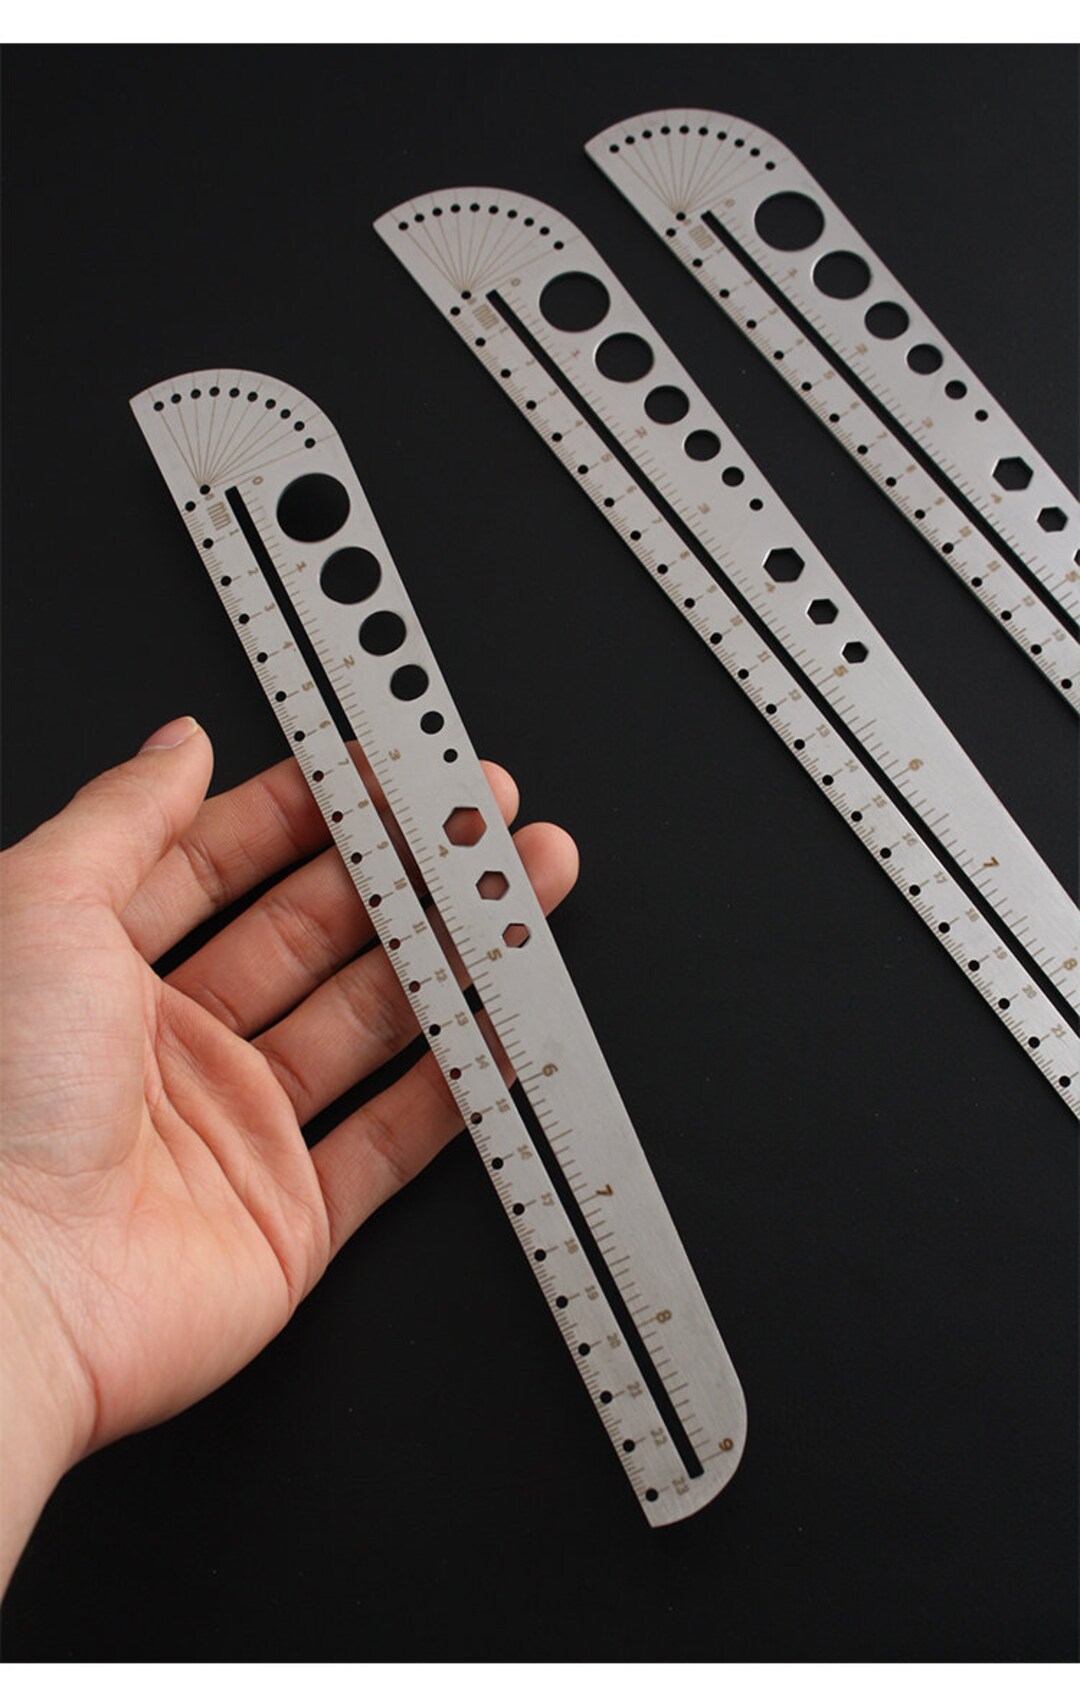 Stainless Steel Standard Ruler - 6 Inch - Pack of 2 - Metric and Imperial  Solid Metal Rulers - Inch Stainless Steel Flat Ruler